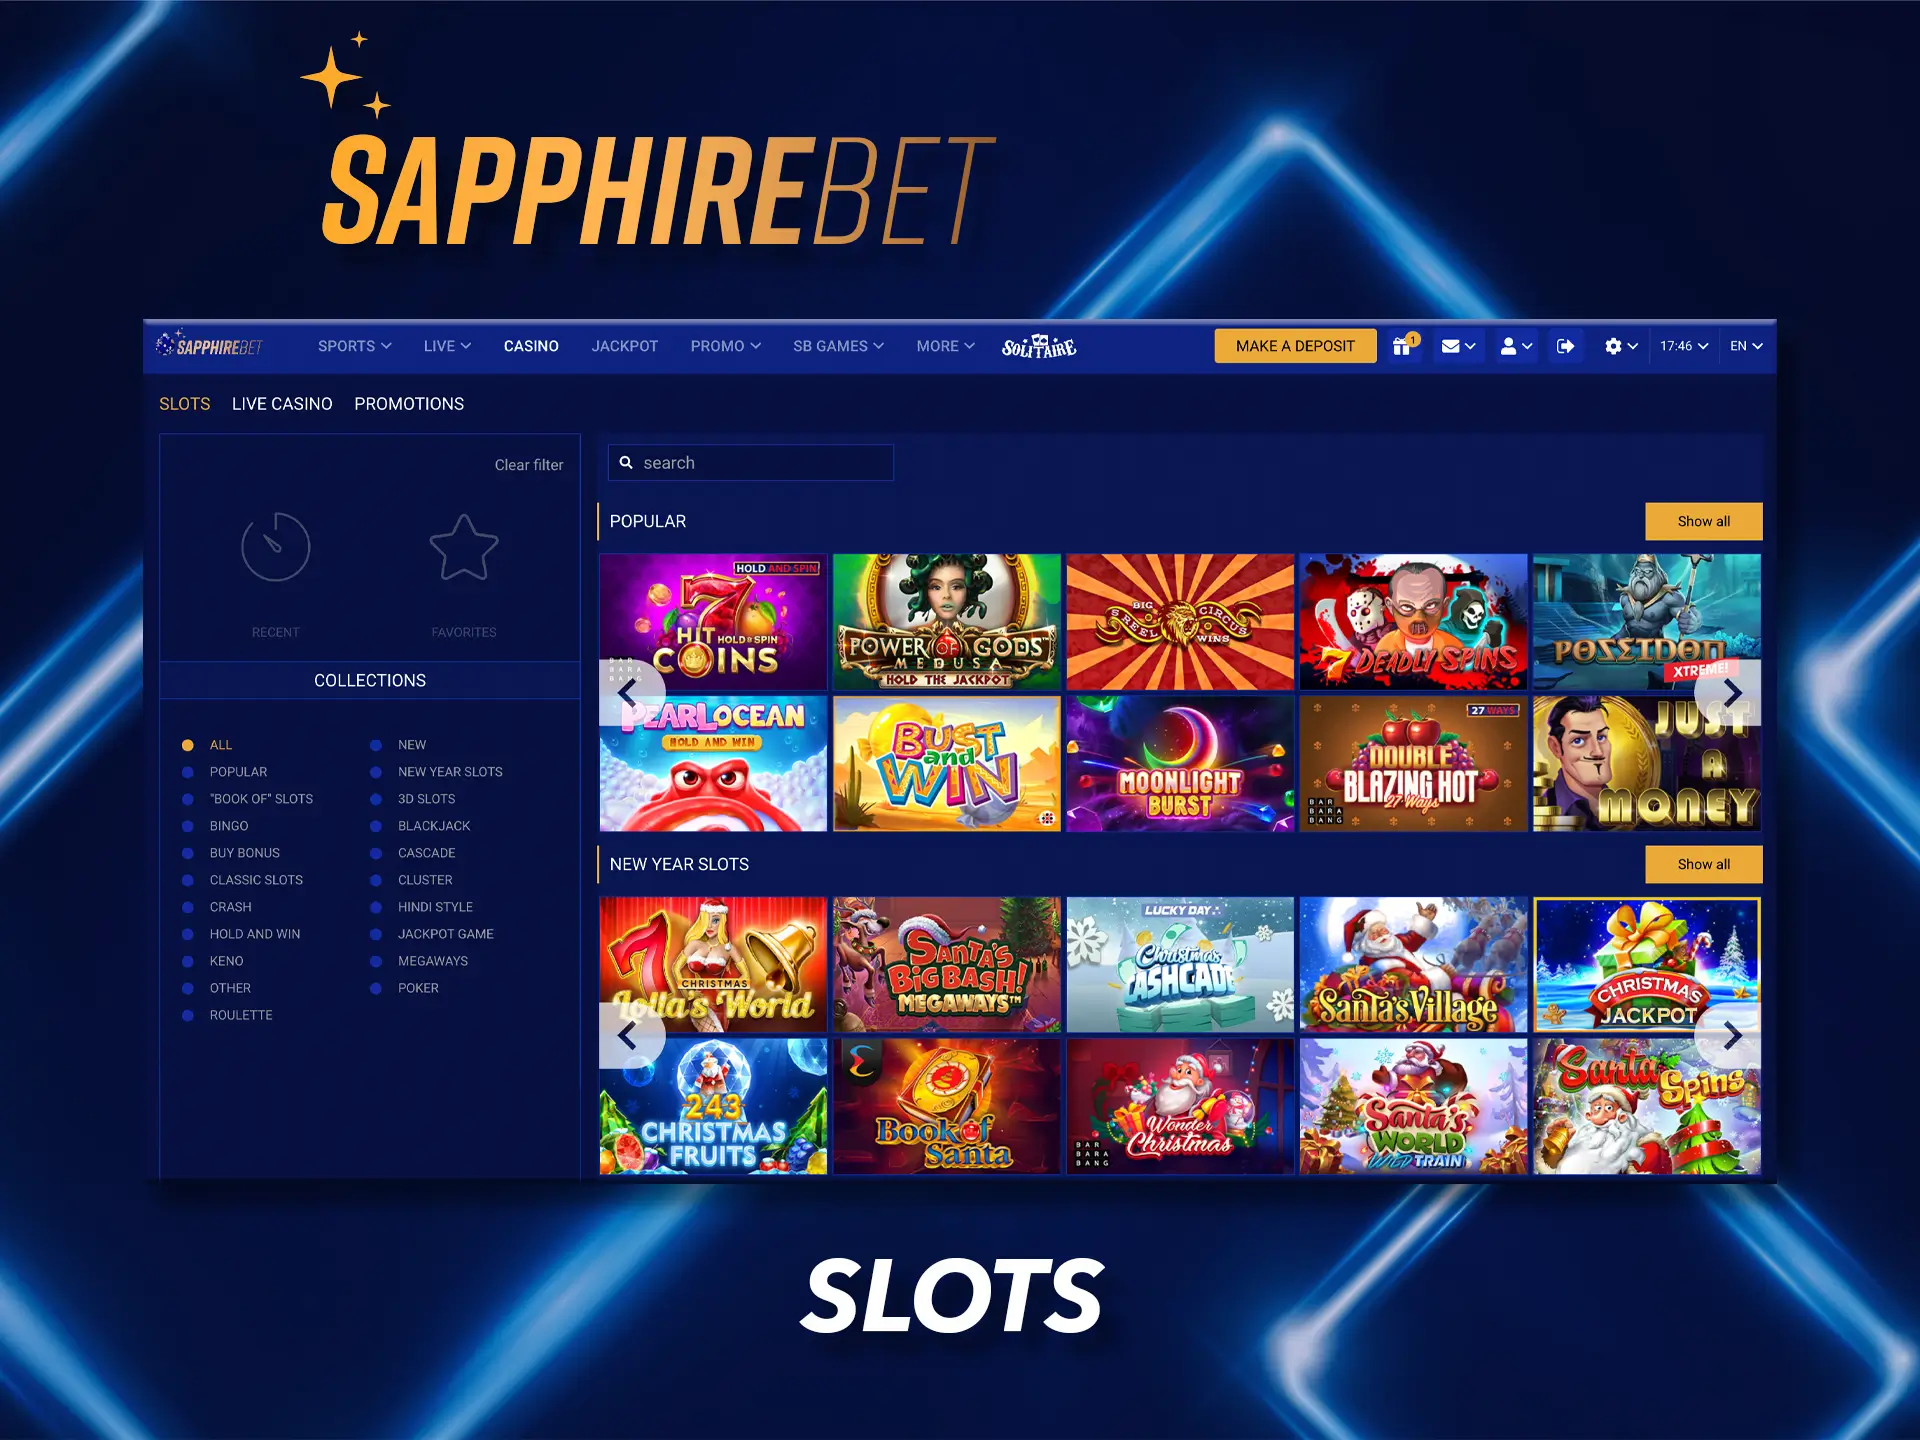 Play your favourite slots at Sapphirebet.